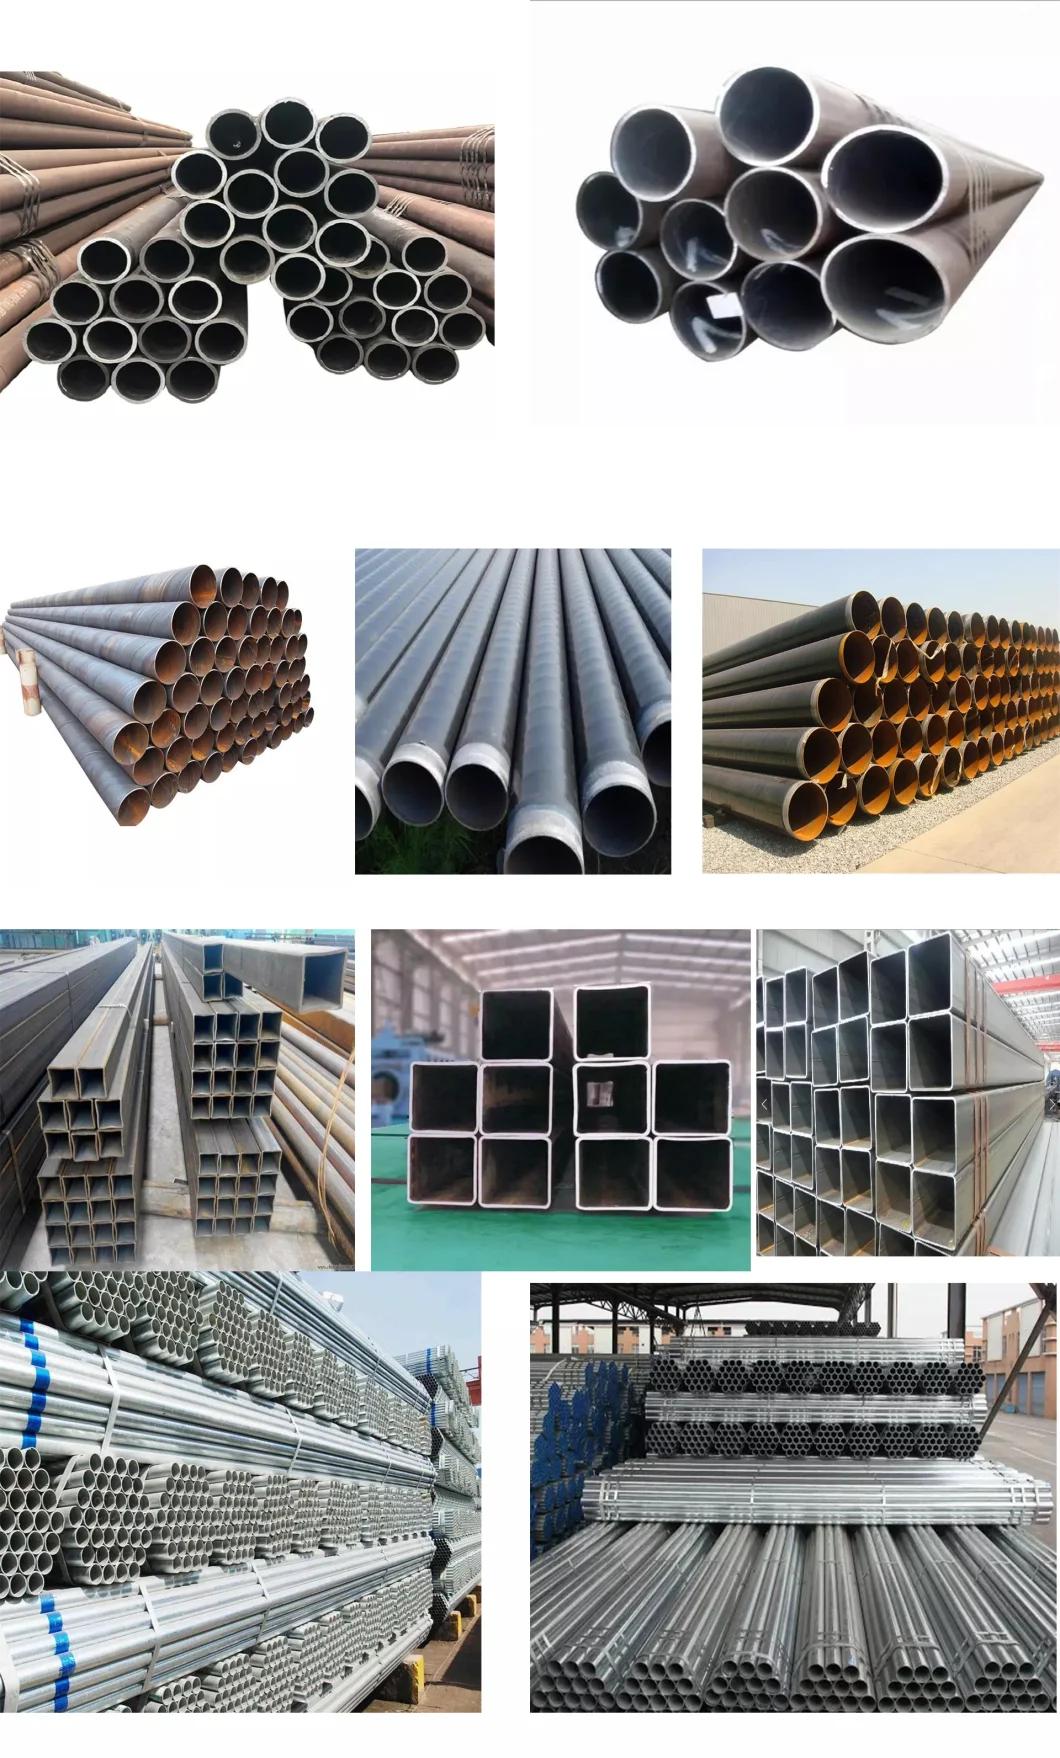 1020 1040 1045 St35 St52 Thin-Walled Seamless Steel Tube/Pipe